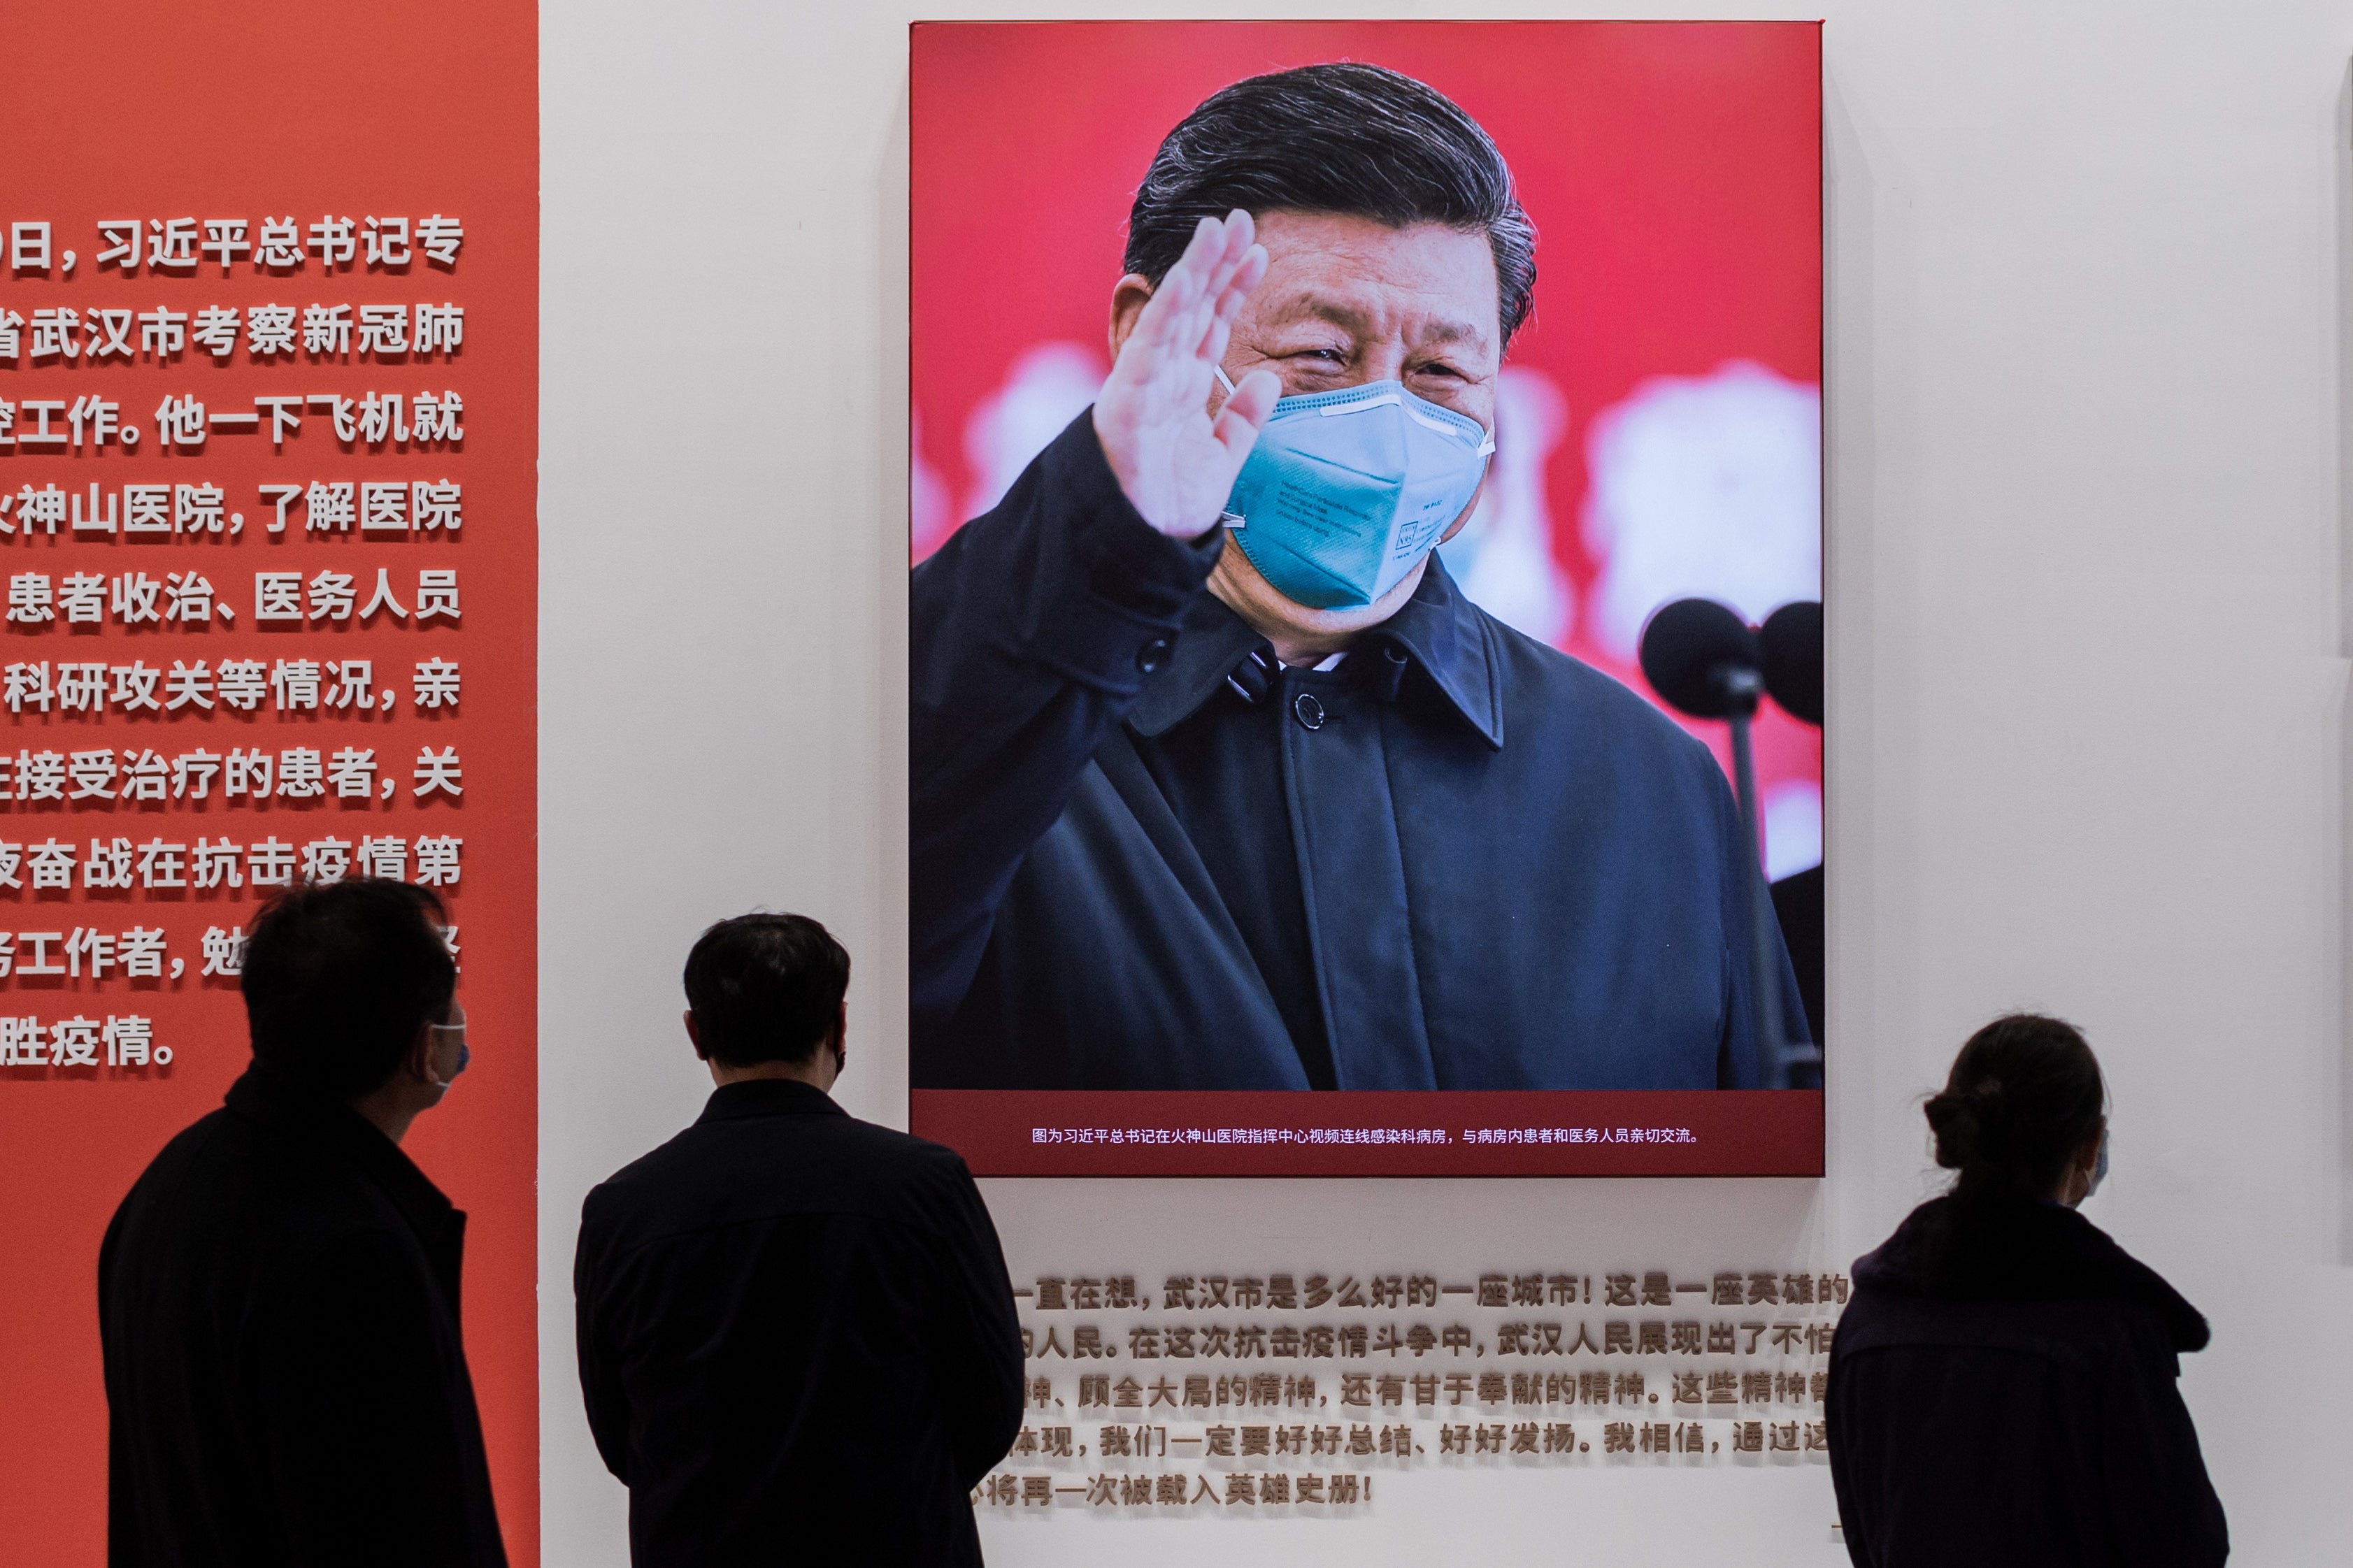 Xi Jinping is ‘proud of our great motherland … and our unyielding national spirit’